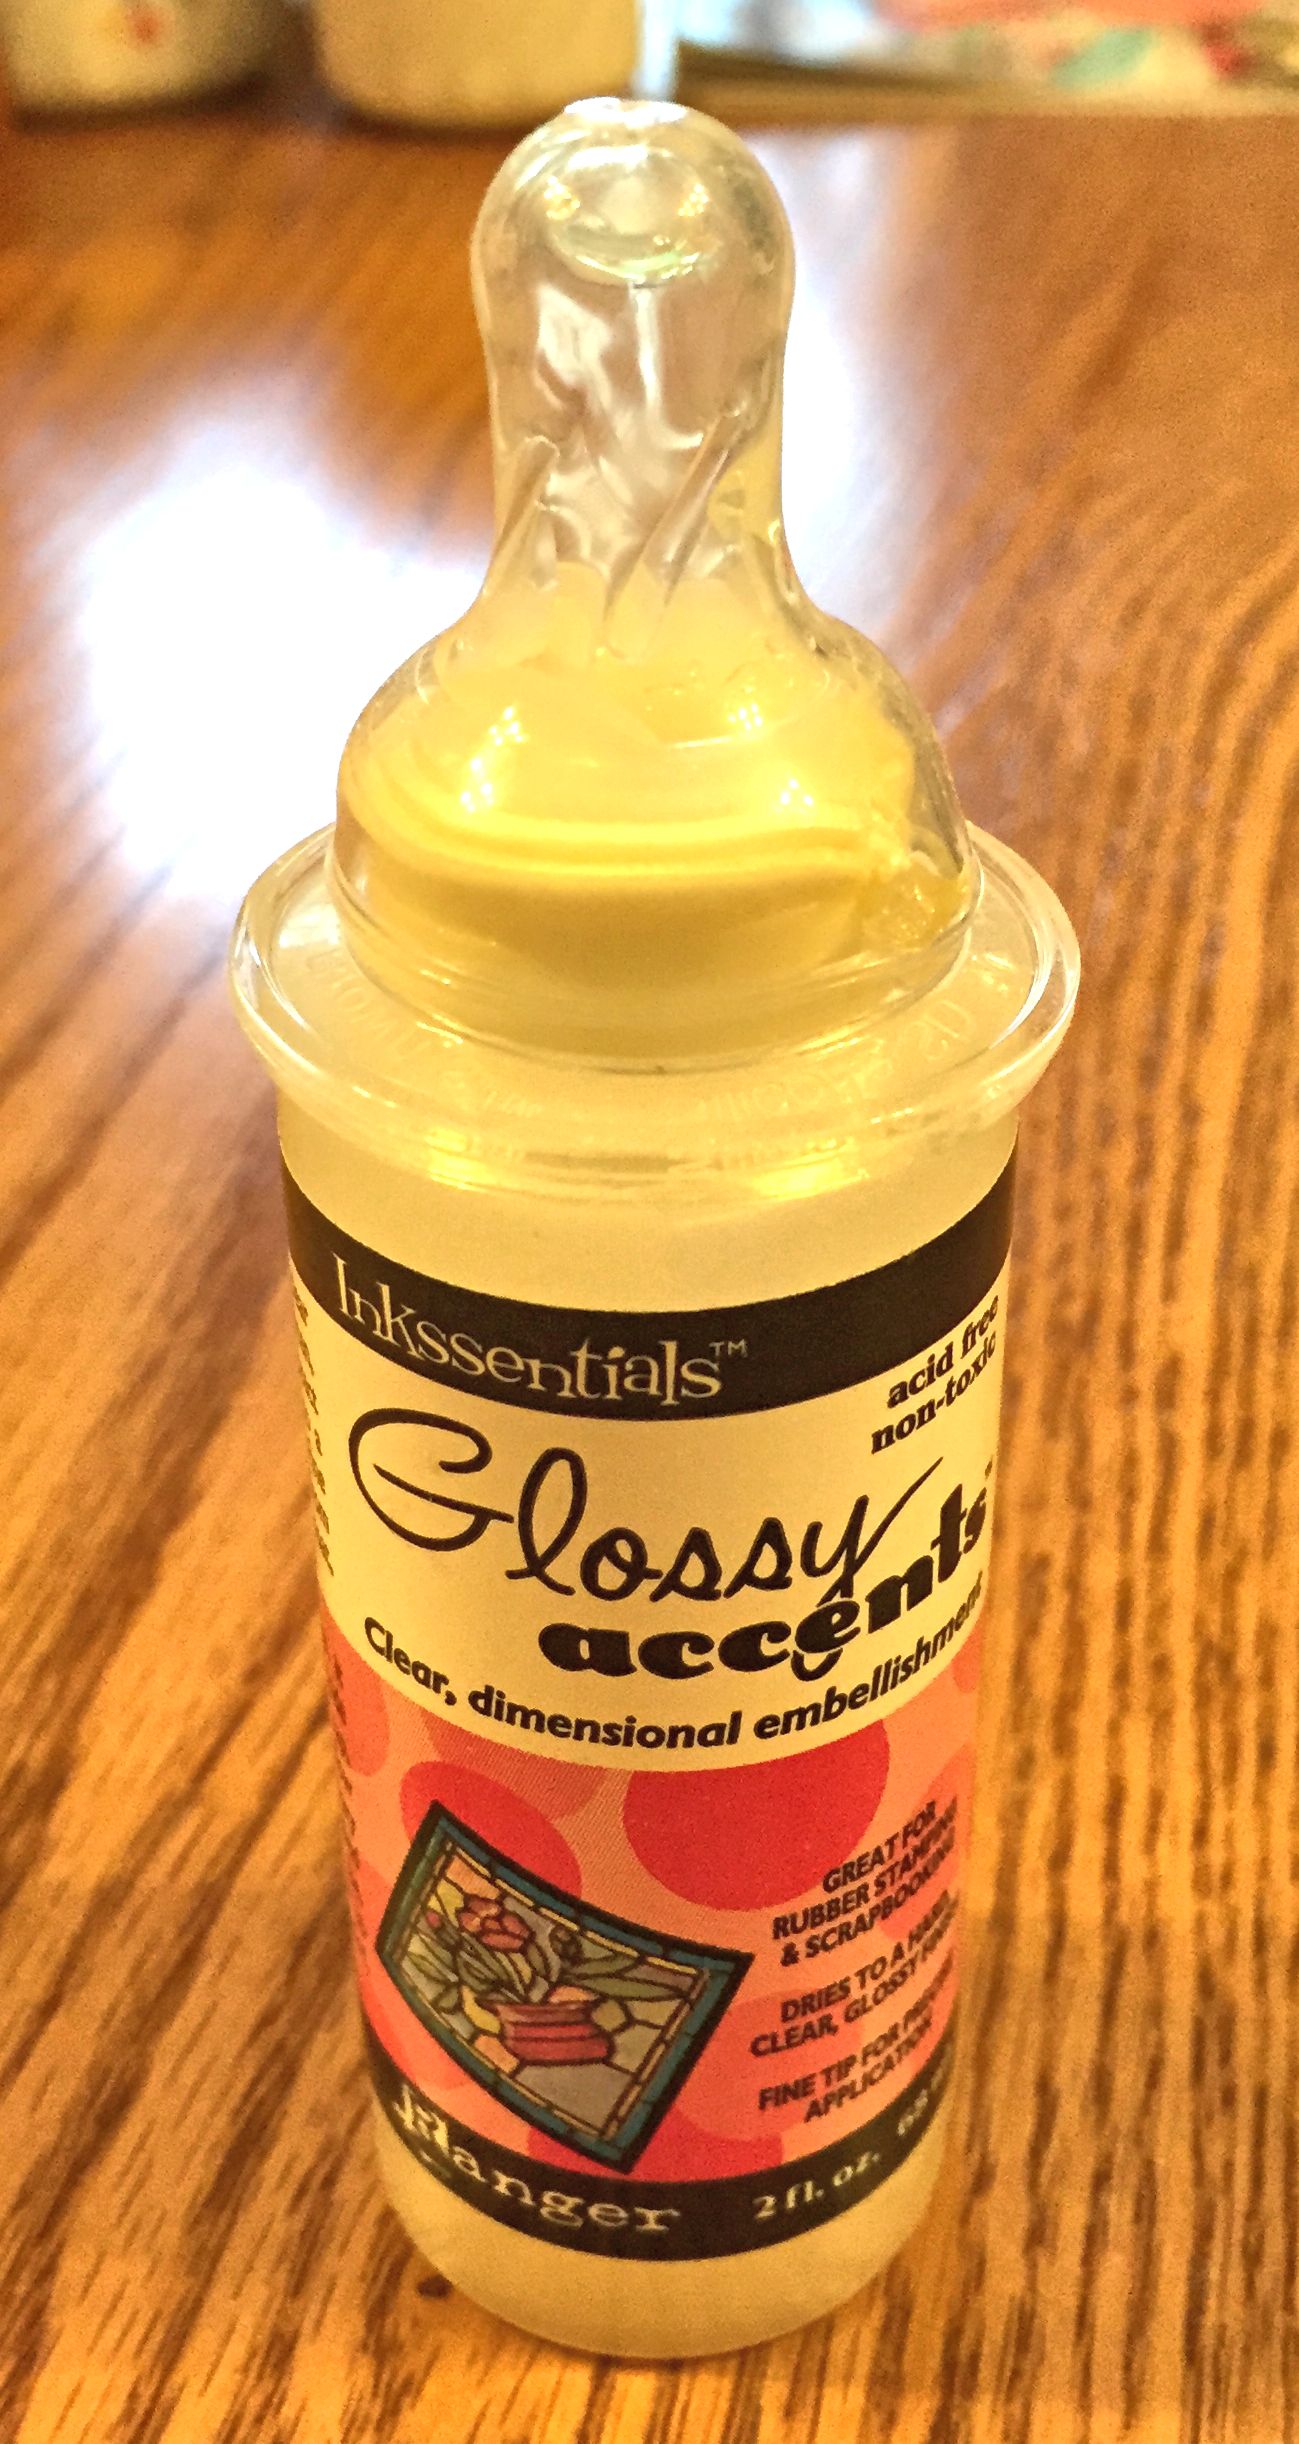 Clogged glue bottle tips, revisited – Judy Nolan